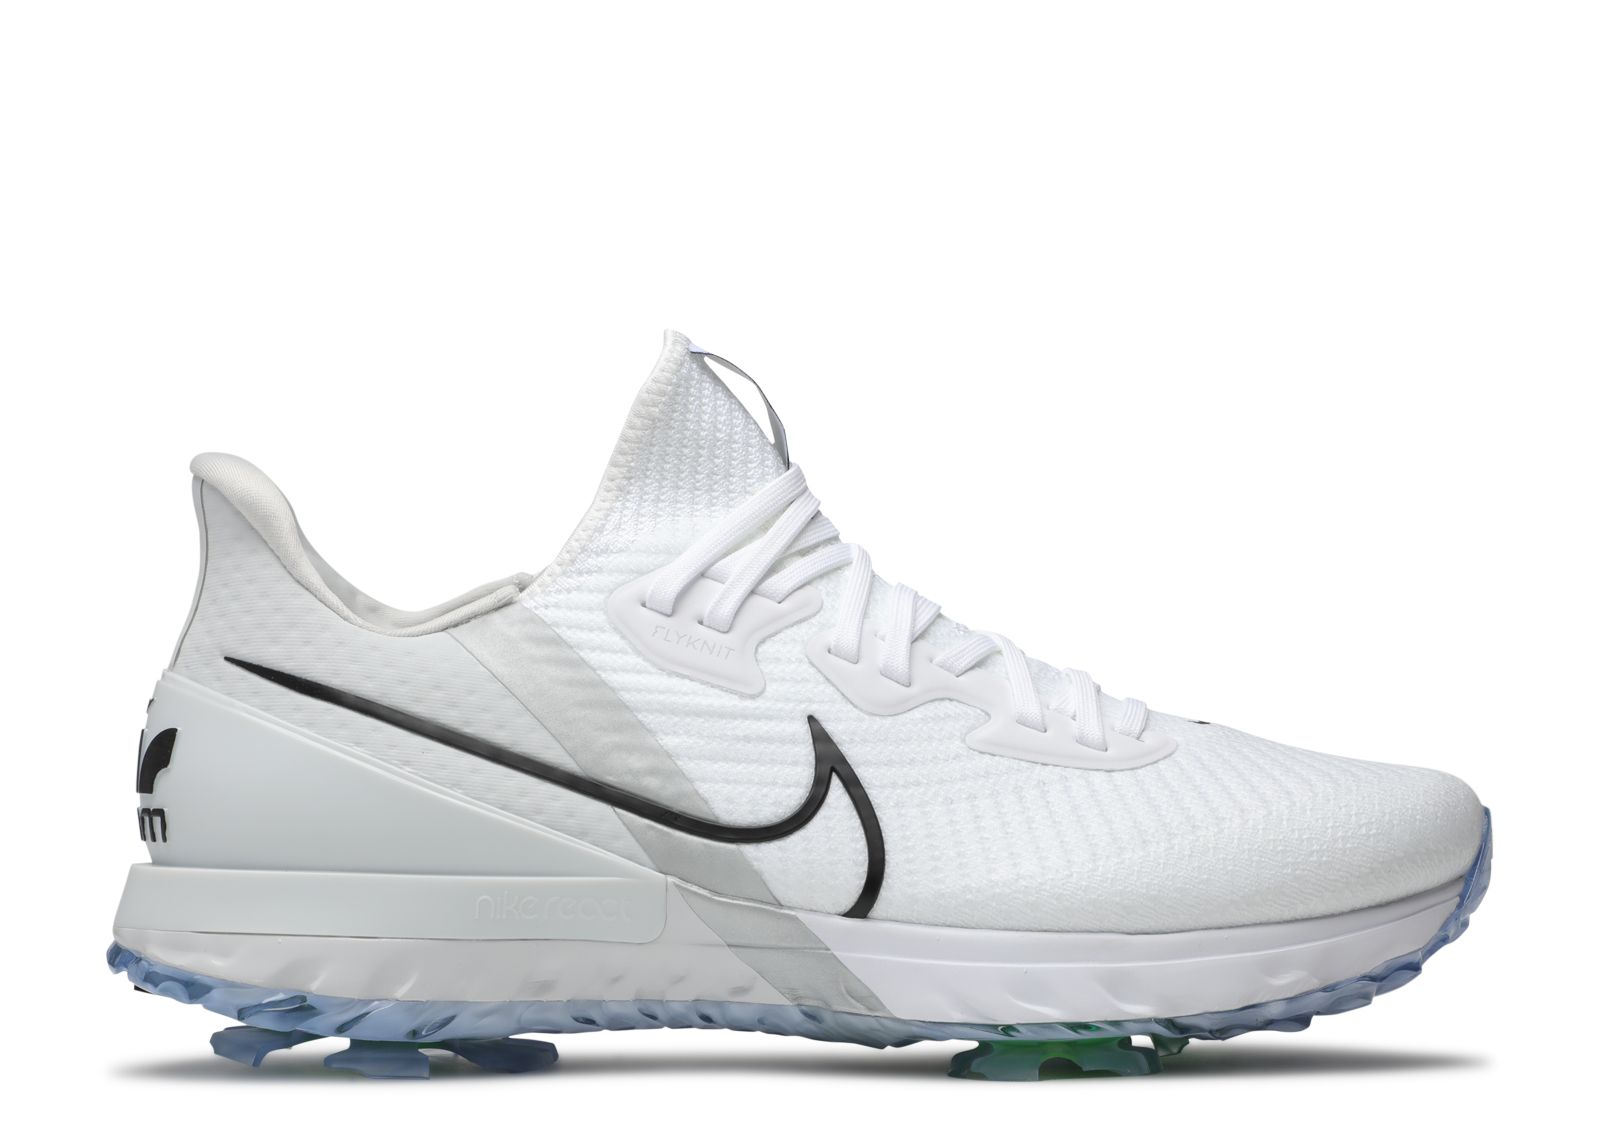 Кроссовки Nike Air Zoom Infinity Tour Golf 'White', белый new white golf shaft adapter golf clubs stability tour carbon steel combined putters rod shaft technology